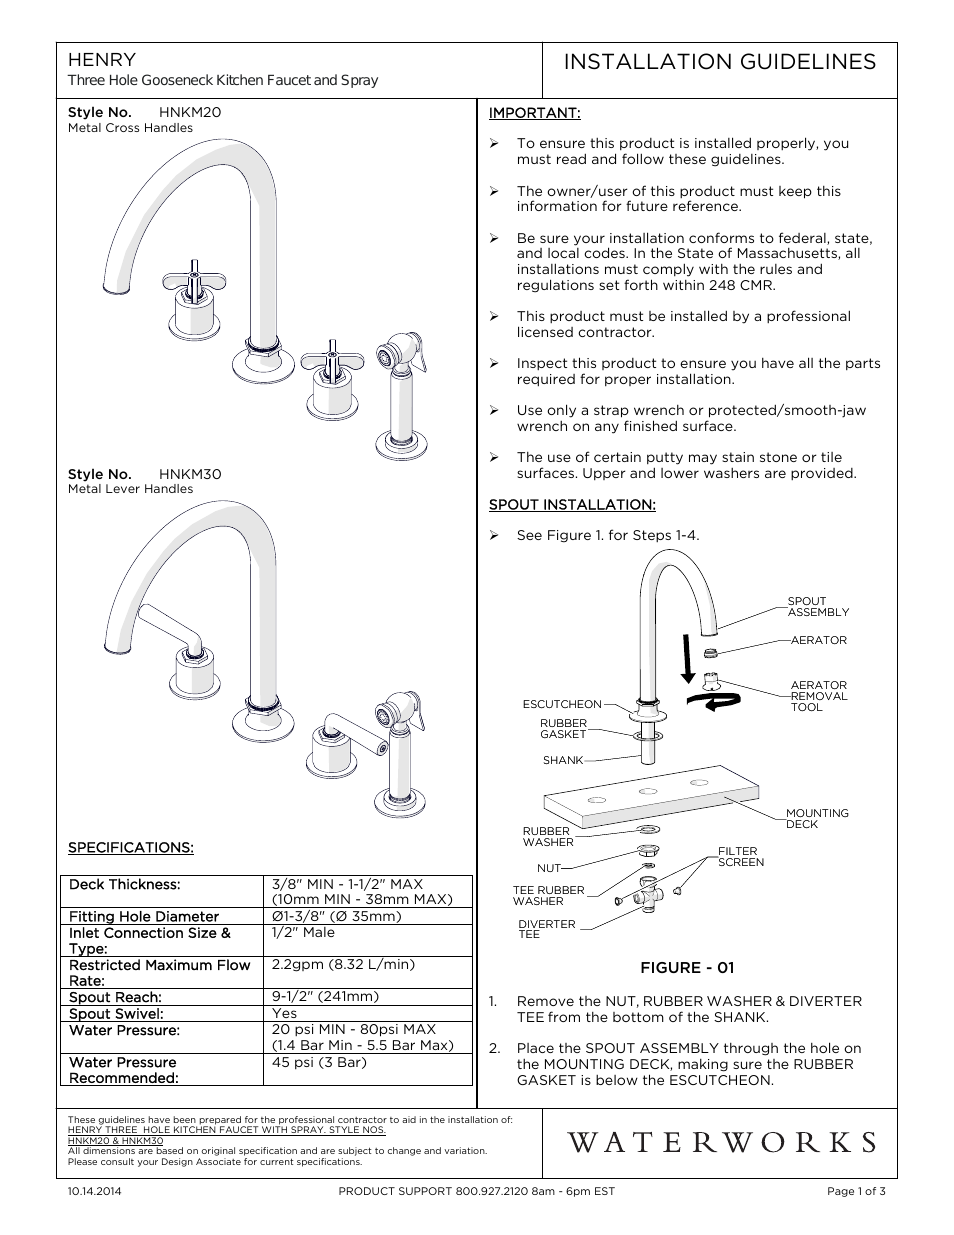 Henry Three Hole Gooseneck Kitchen Faucet, Metal Lever Handles and Spray